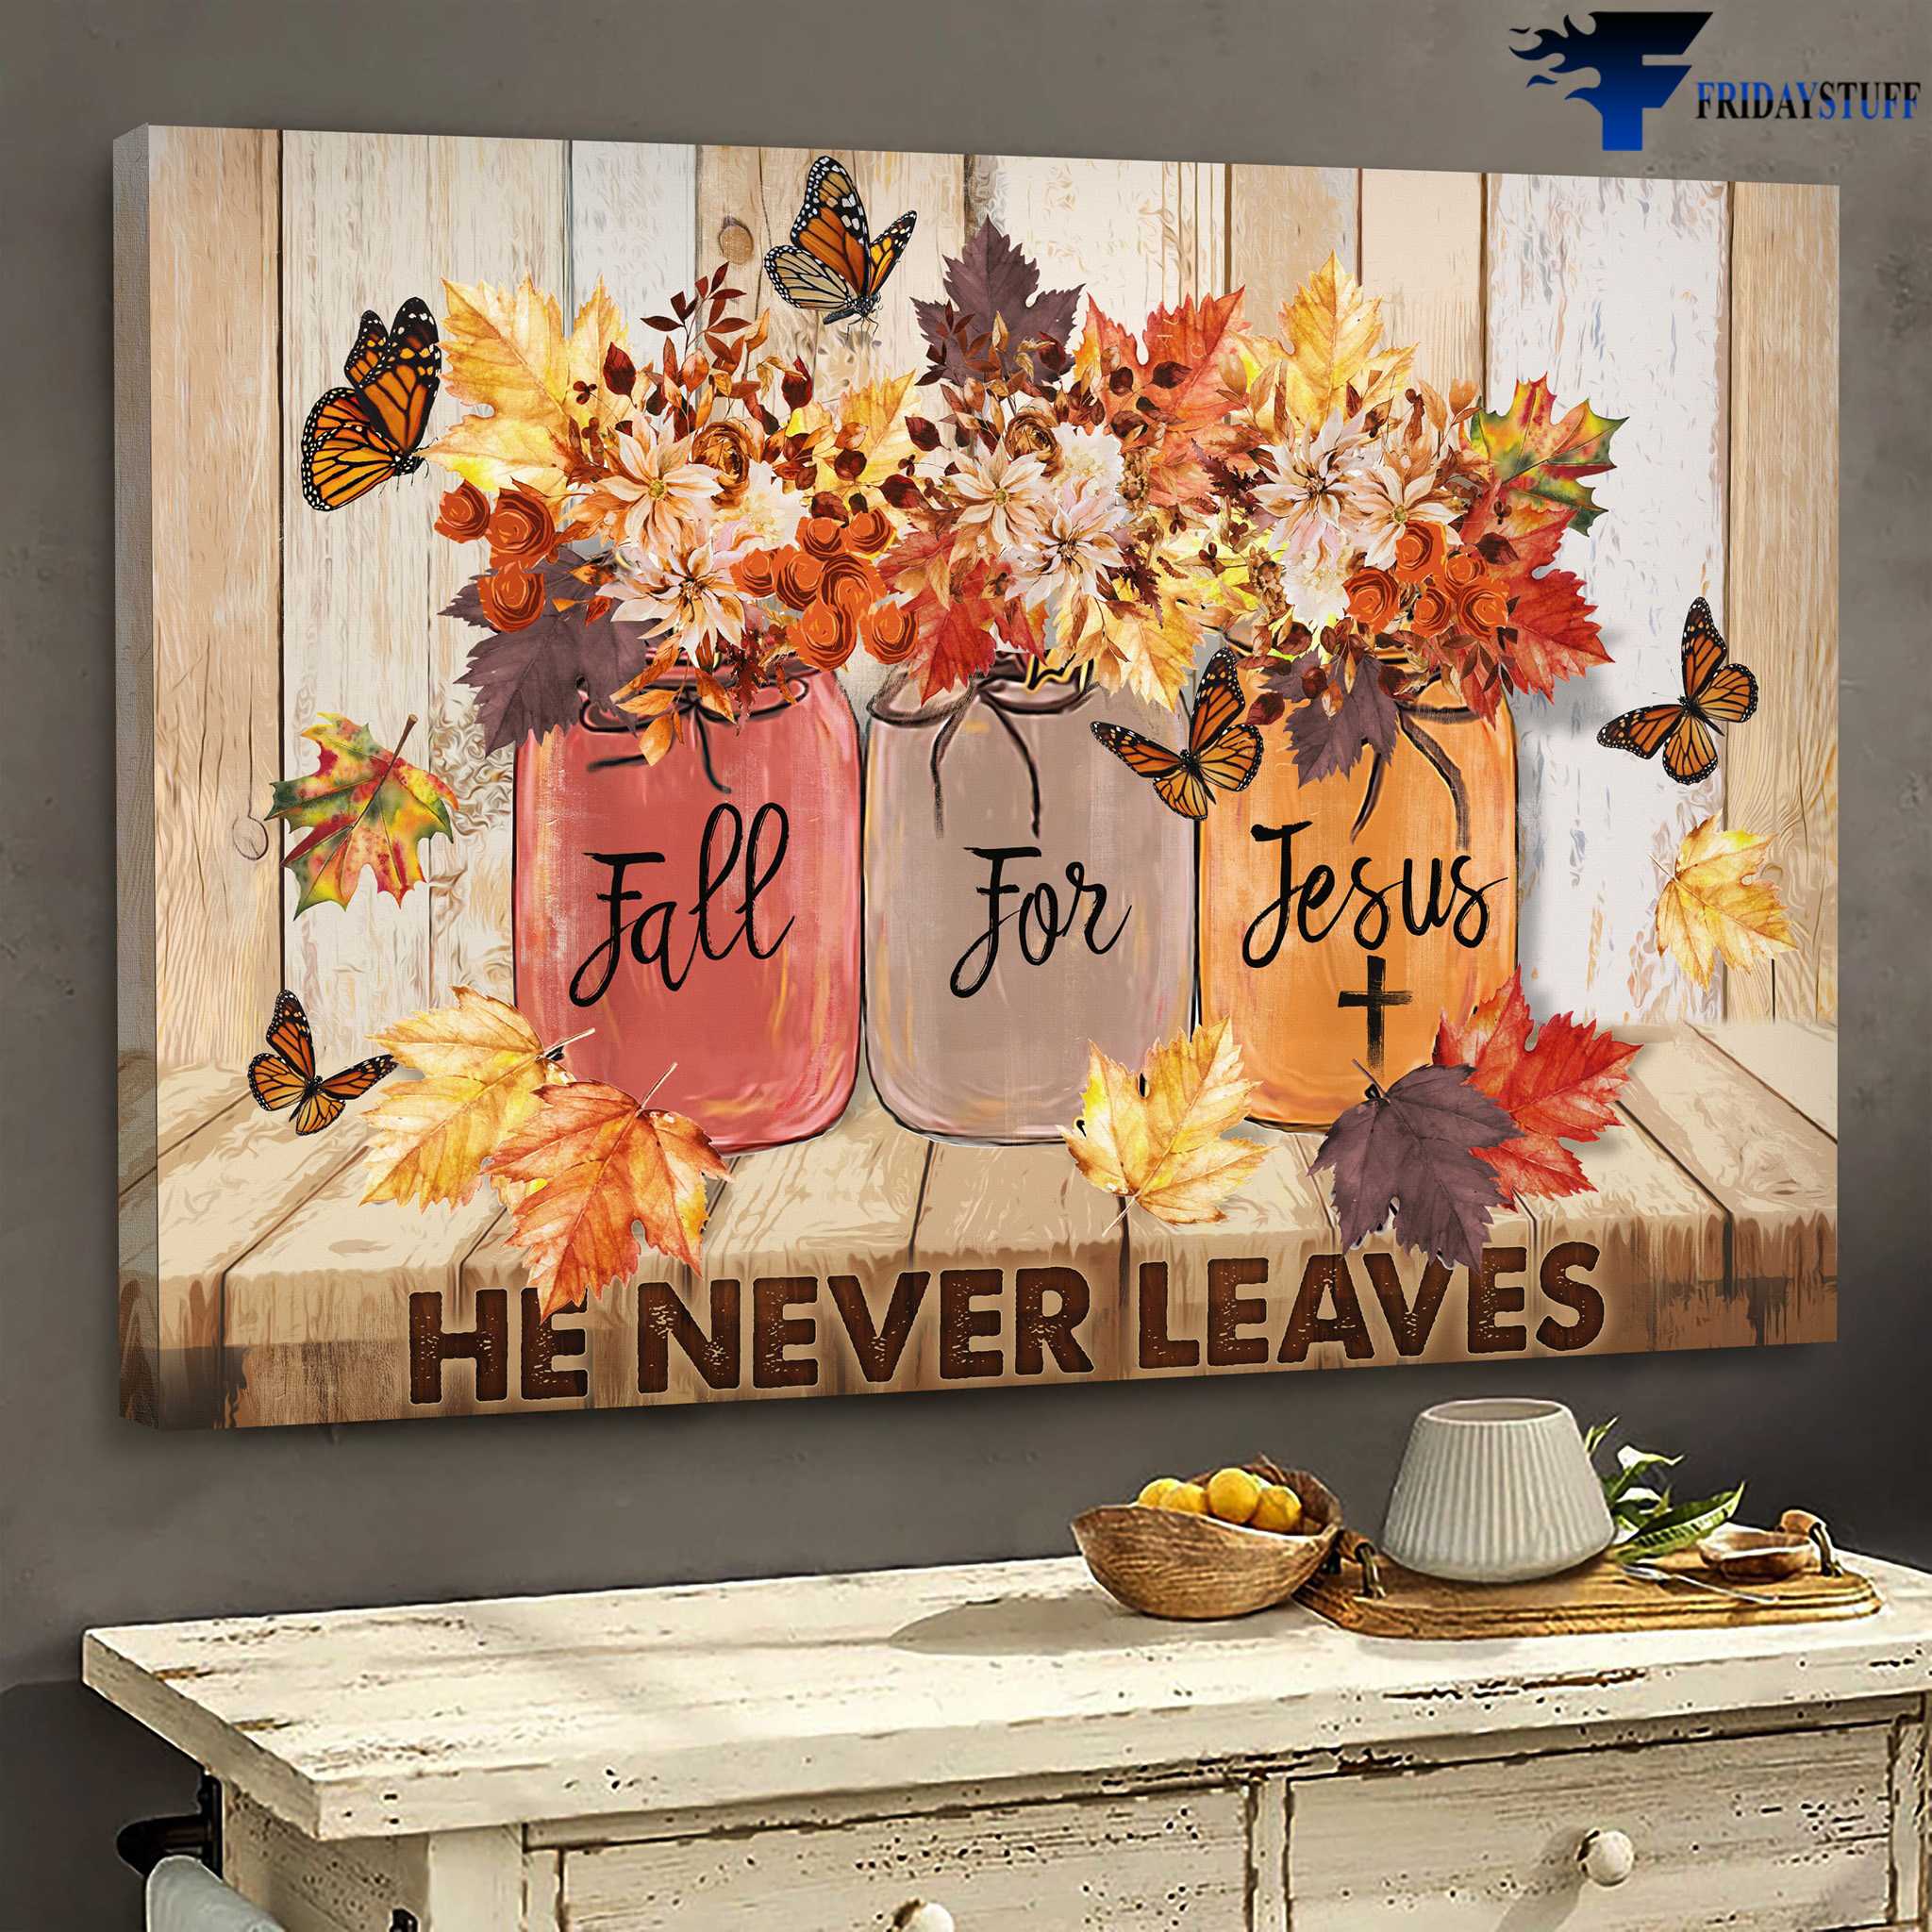 Butterfly Autumn - Fall For Jesus, He Never Leaves